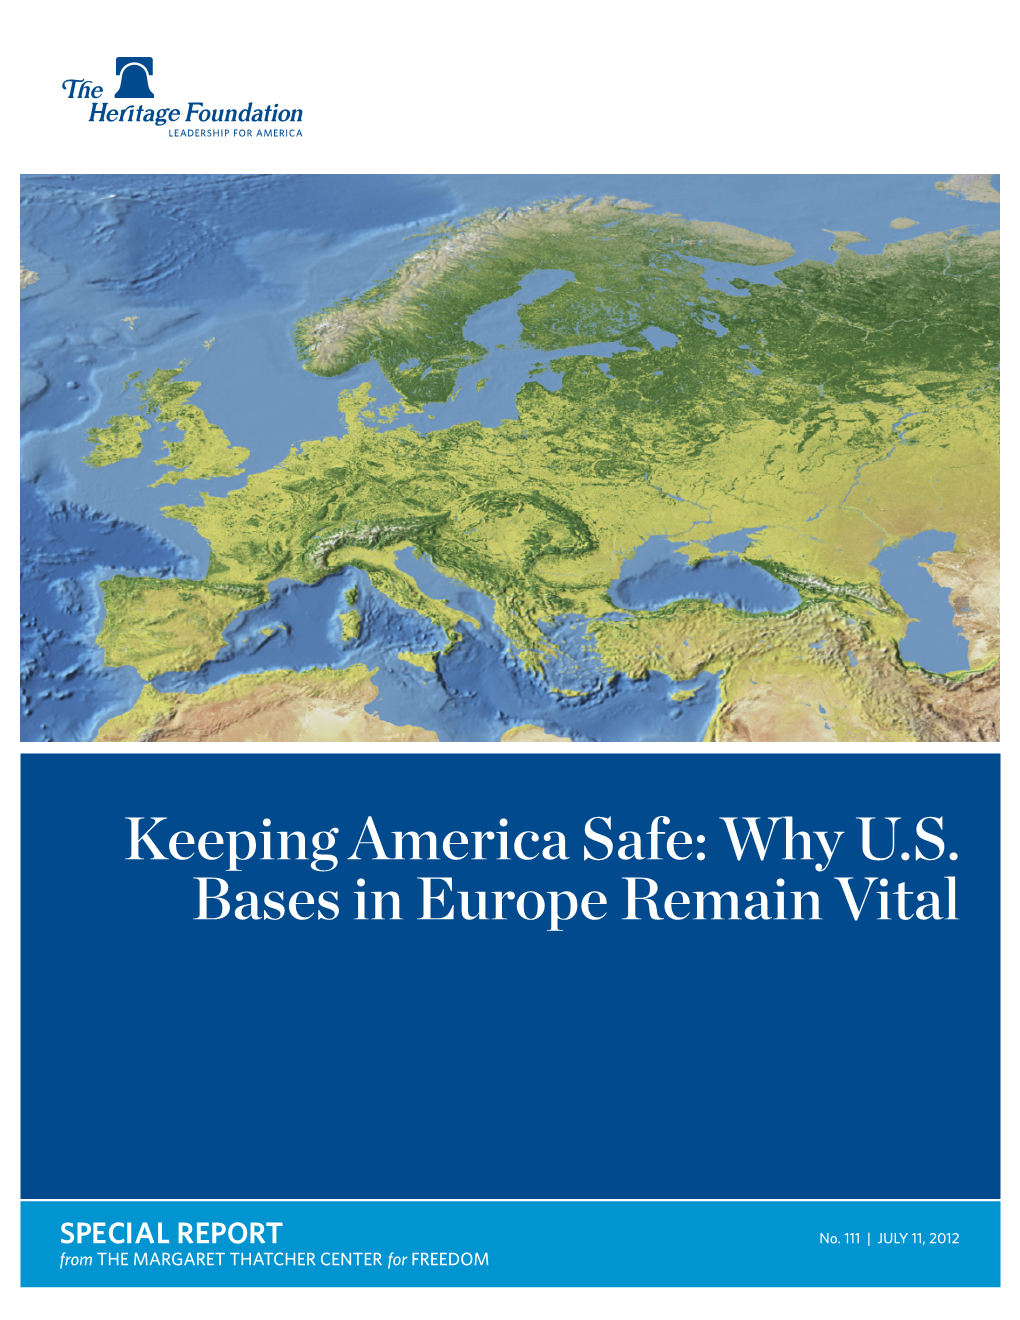 Keeping America Safe: Why U.S. Bases in Europe Remain Vital